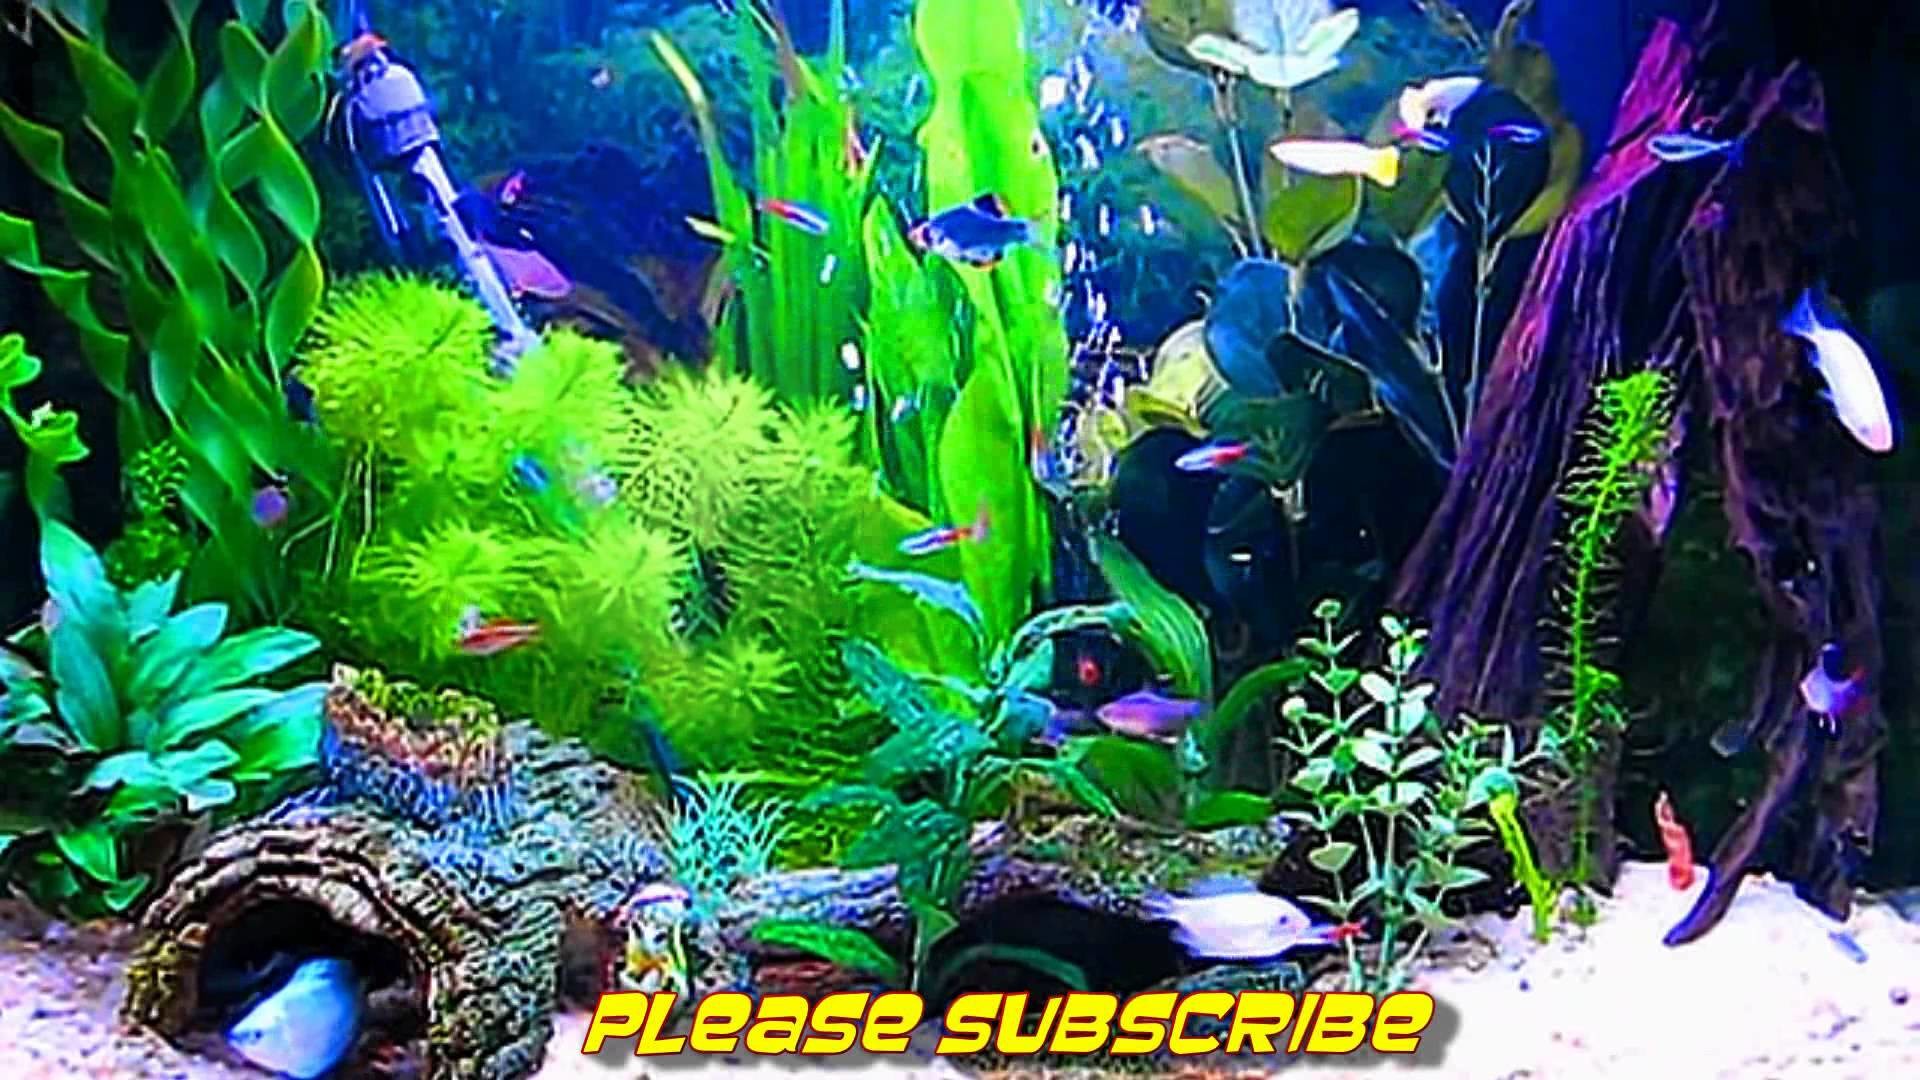 1920x1080 Download Live Aquarium Wallpaper For Mobile Gallery | Free Wallpapers |  Pinterest | Wallpaper and Wallpaper gallery